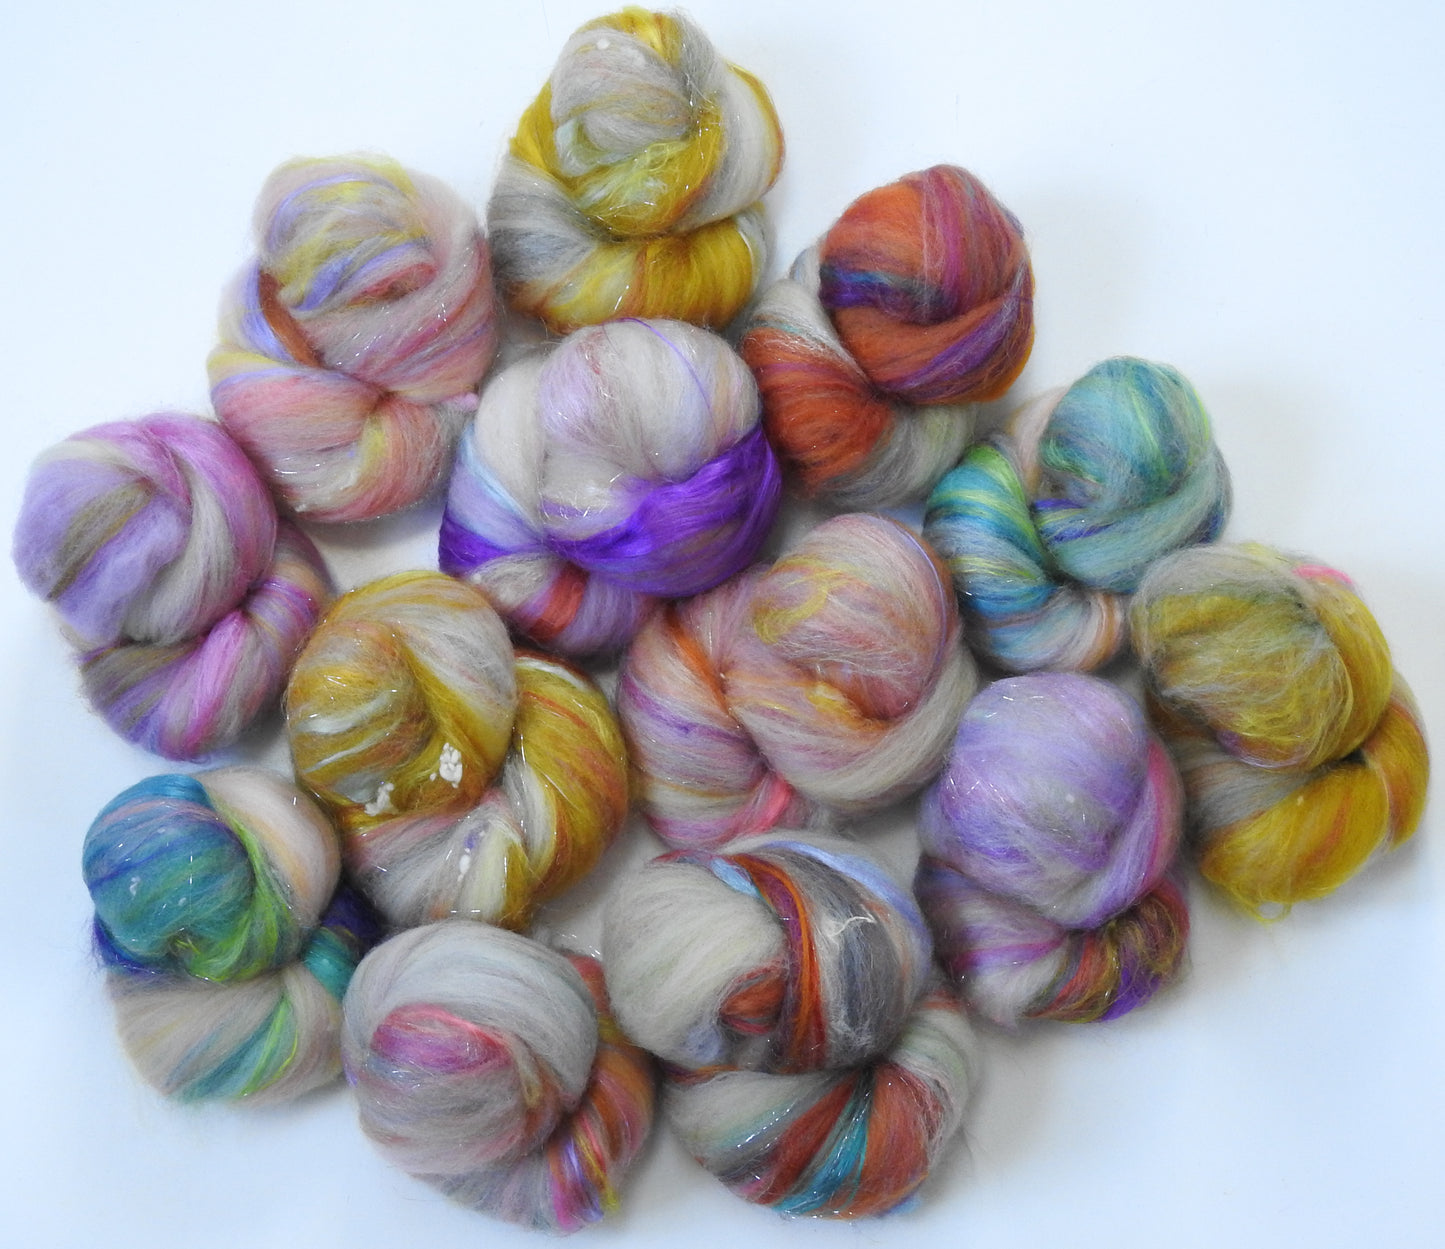 Fairy Cakes- (4.4 oz) Wild and Wooly Sticklebatts -Organic Polwarth, silk,FLAX, wool nepps, angelina, bamboo